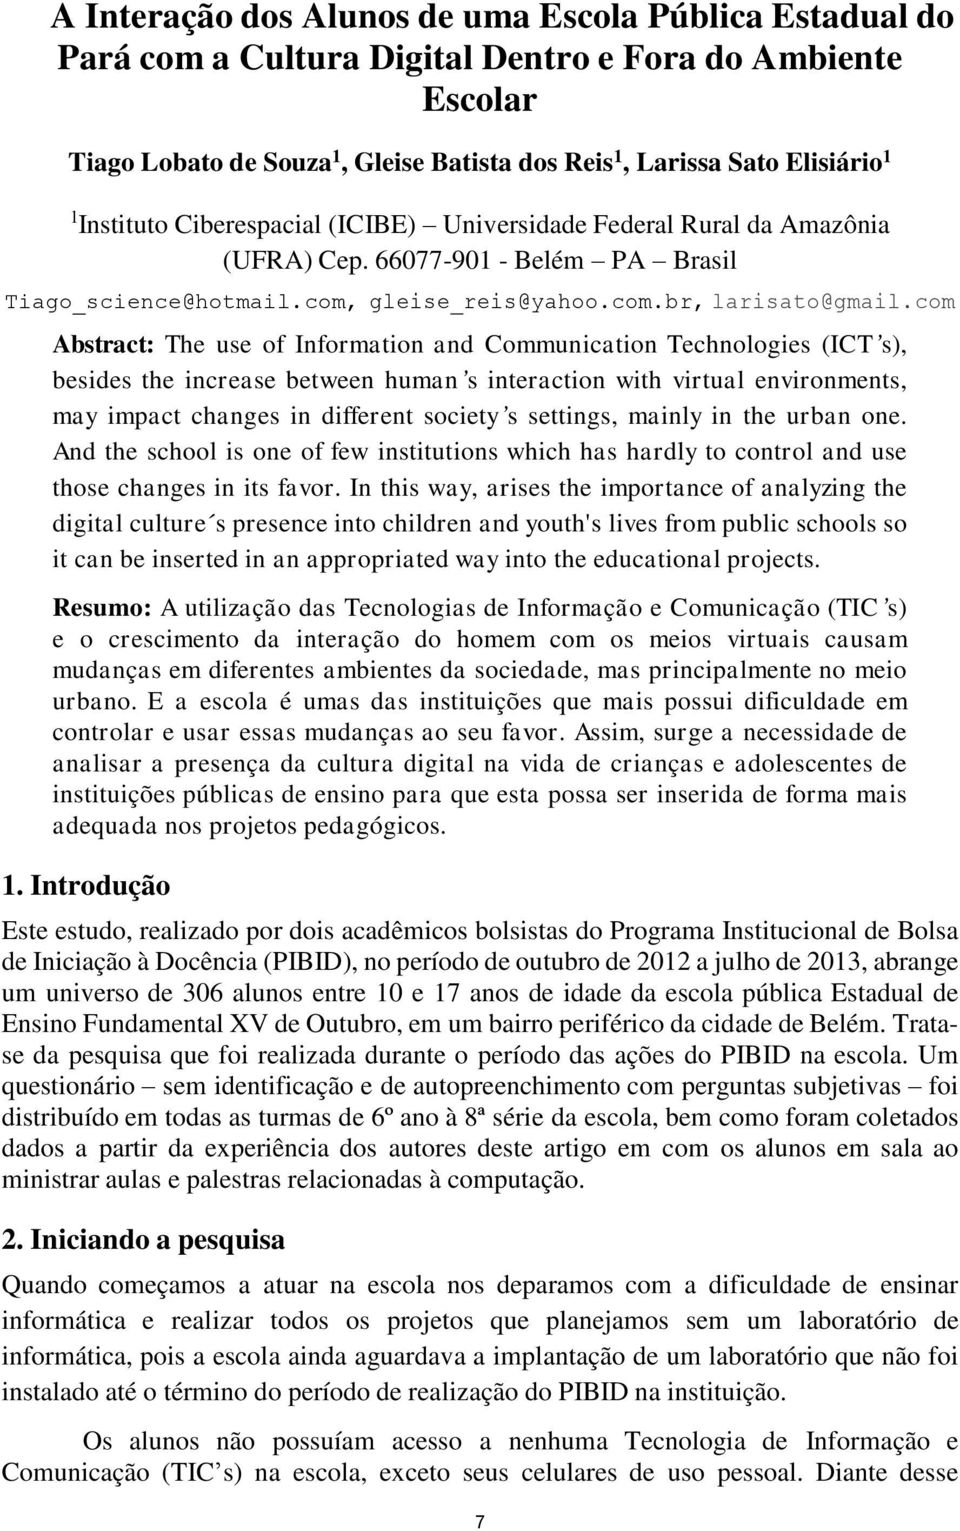 com Abstract: The use of Information and Communication Technologies (ICT s), besides the increase between human s interaction with virtual environments, may impact changes in different society s